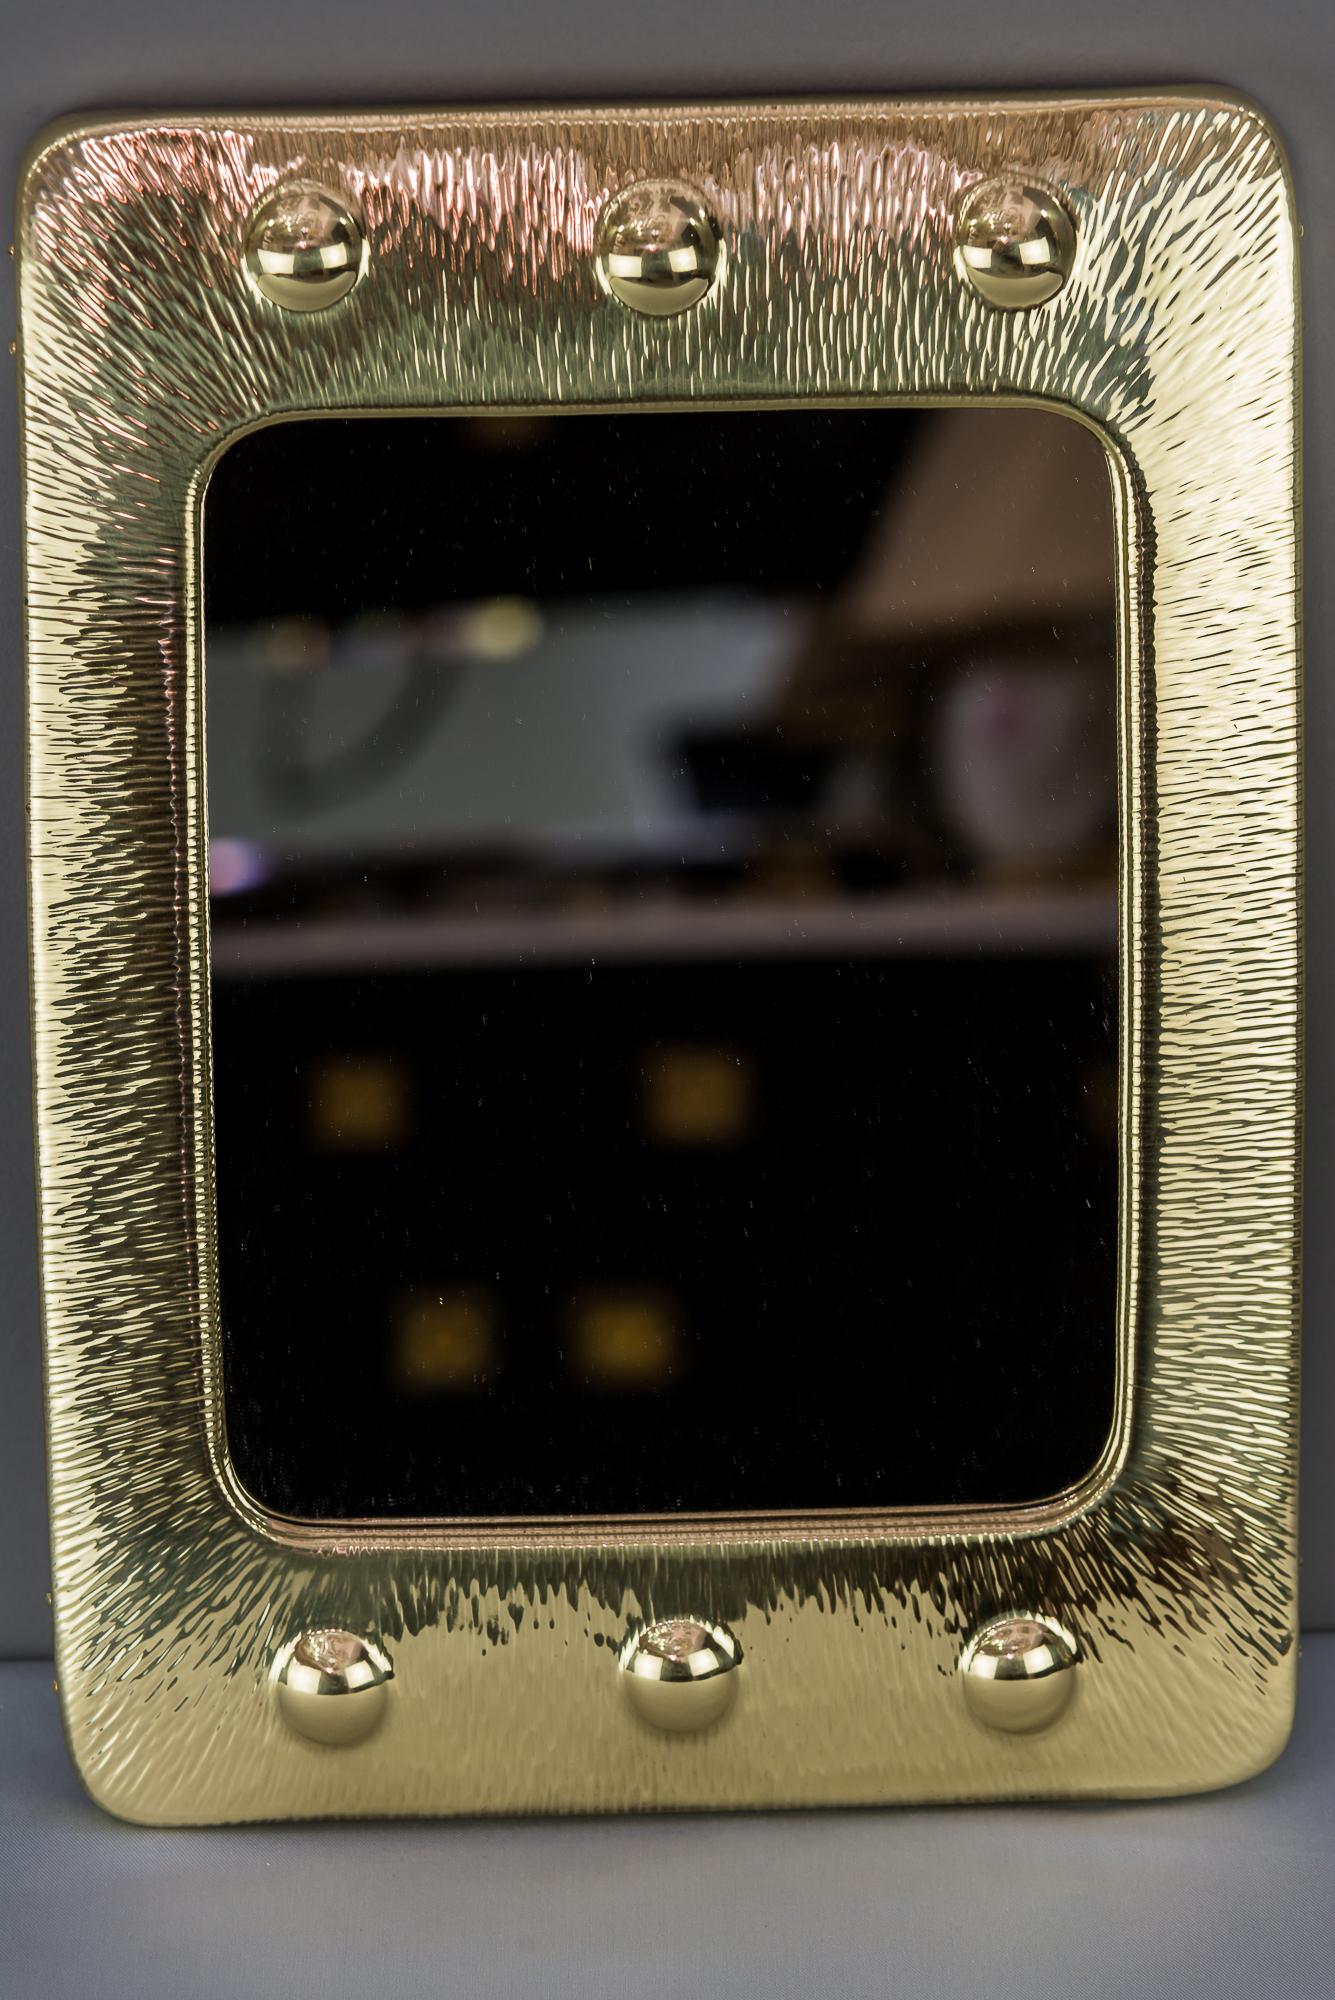 Art Deco hammered brass mirror, Vienna, 1920s
Polished brass and stove enameled.